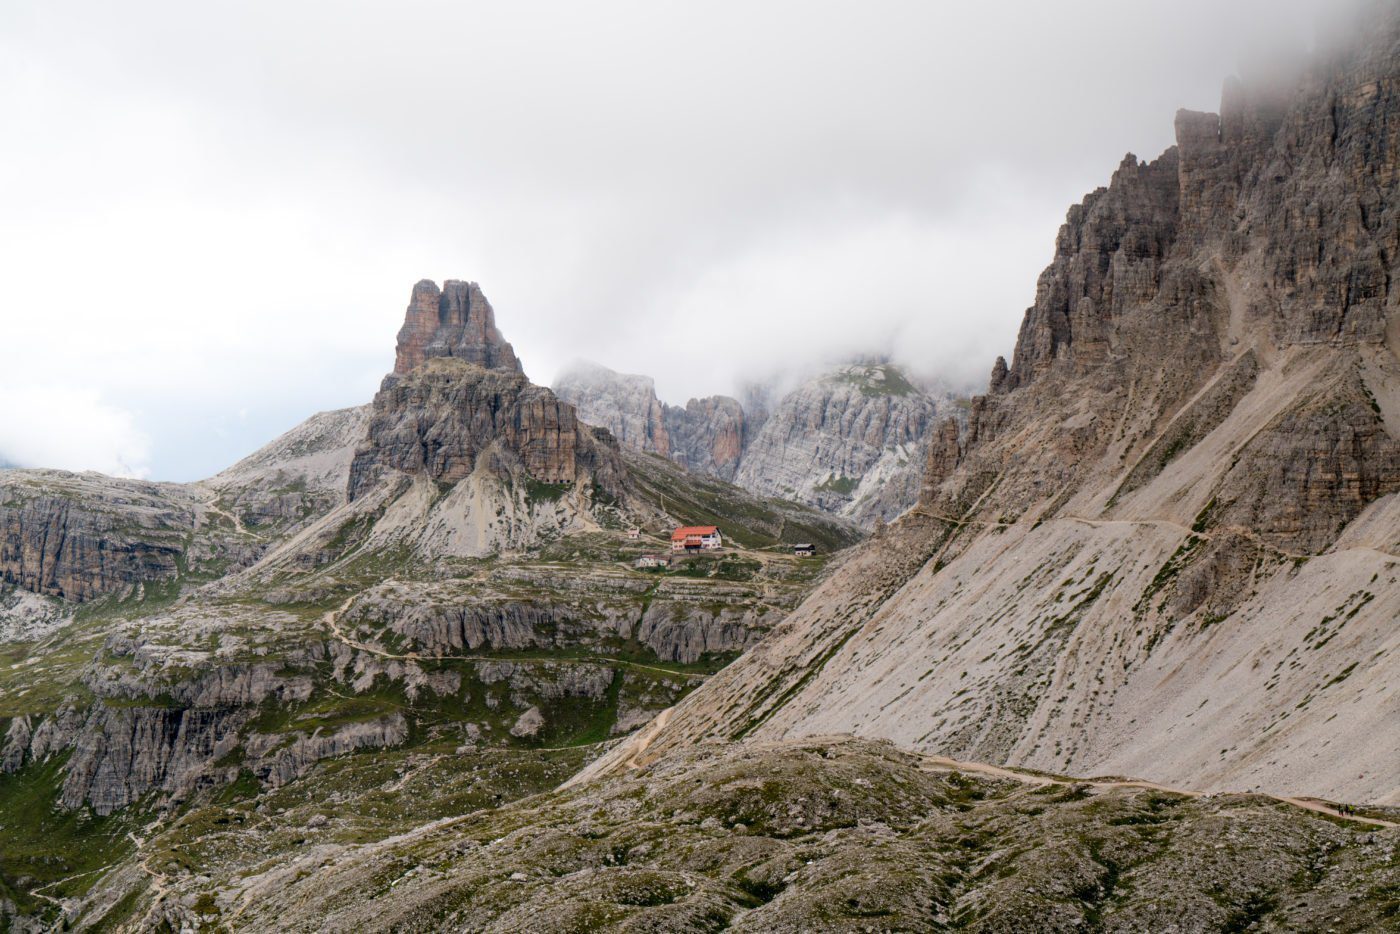 On the way to the hut at Tre Cime